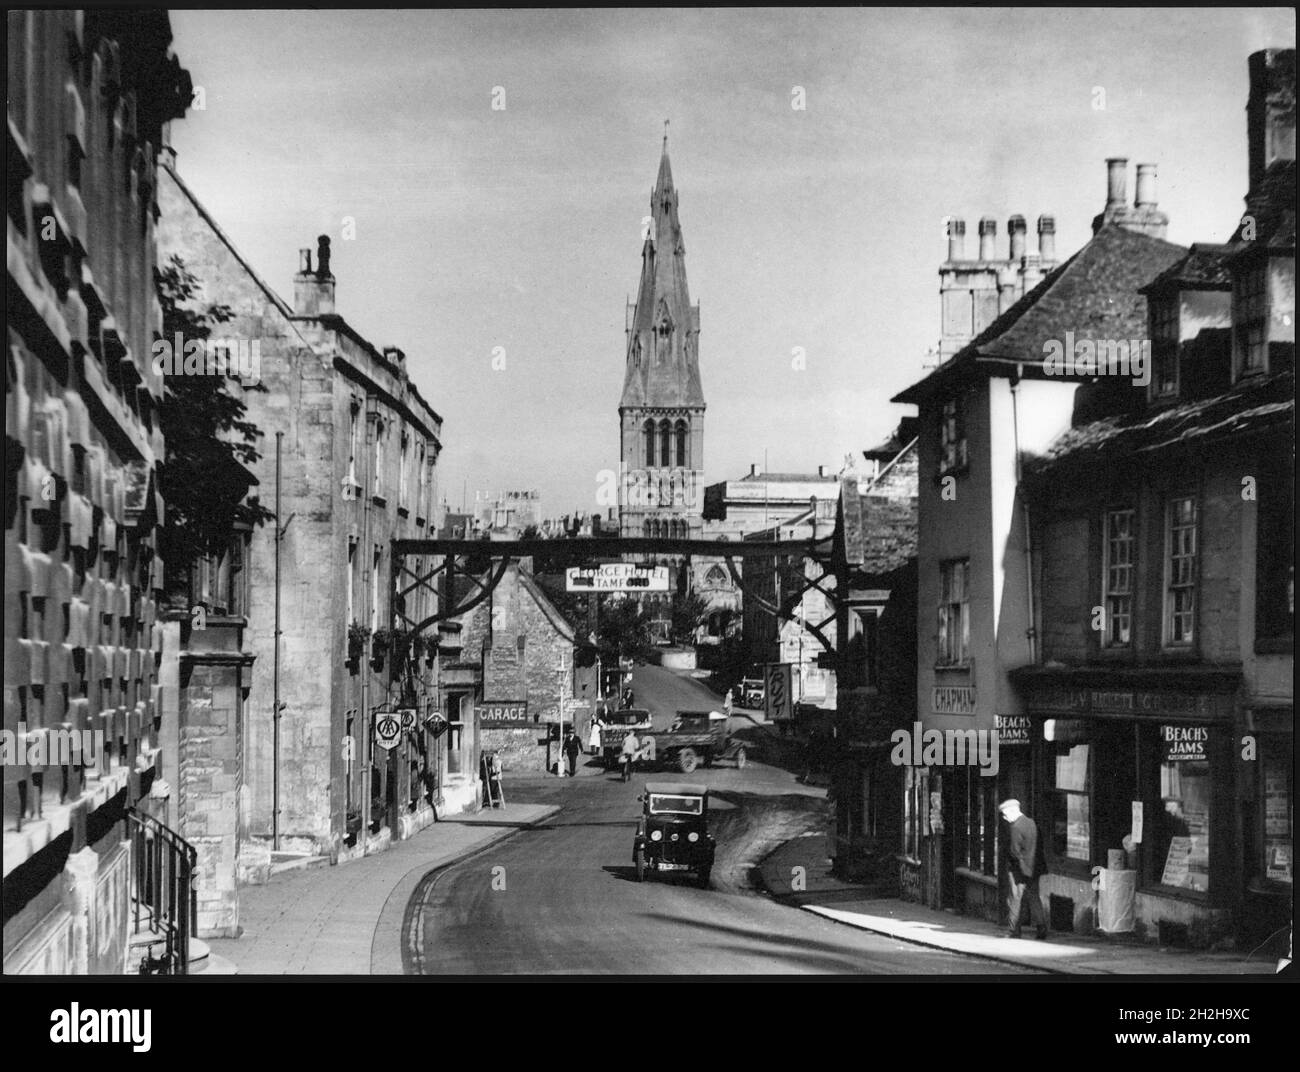 High Street St Martin's, Stamford, South Kesteven, Lincolnshire, 1920-1940. A view looking north along High Street St Martin's with the George Hotel in the foreground and the tower of St Mary's Church in the distance. Stock Photo